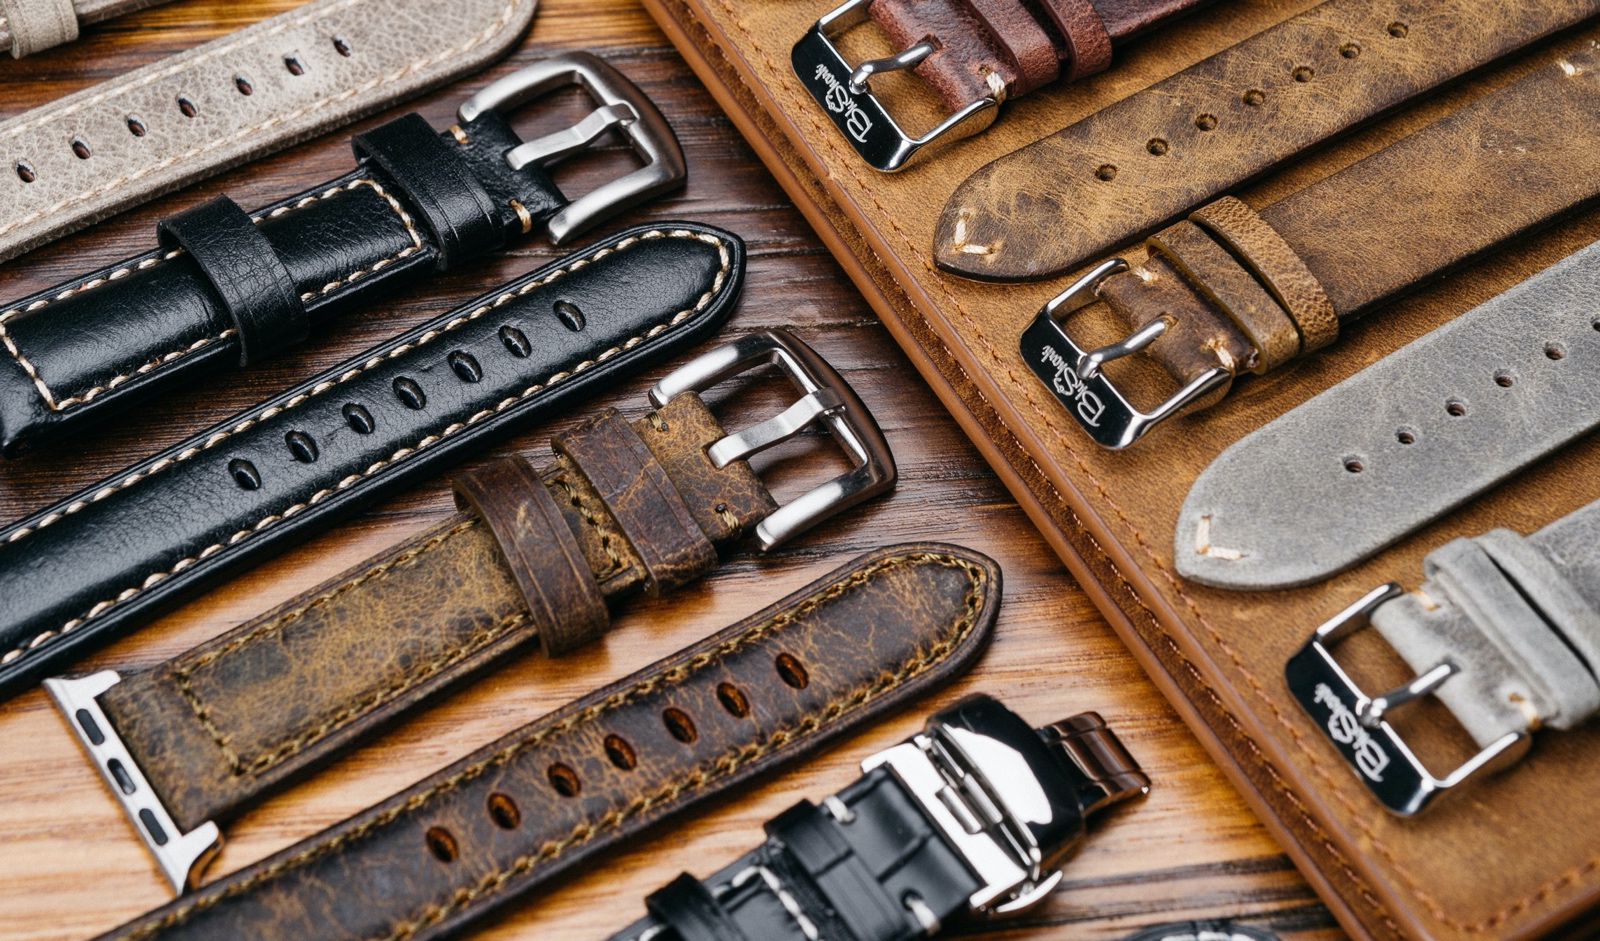 MacRumors Giveaway: Win a Leather Apple Watch Band From BluShark